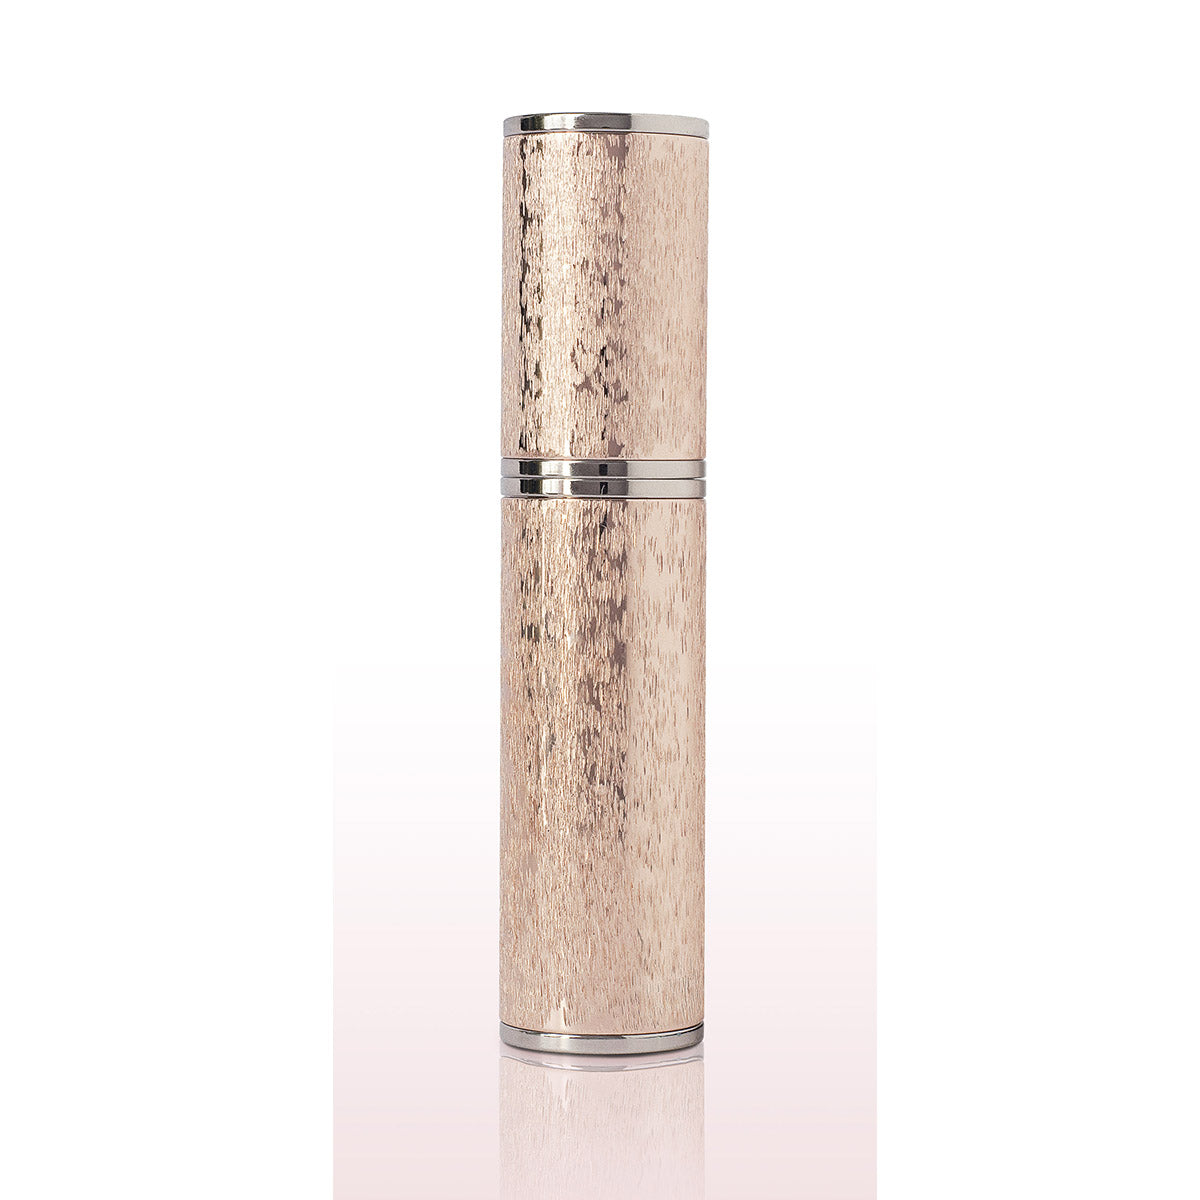 Refillable Purse spray in Pink Gold